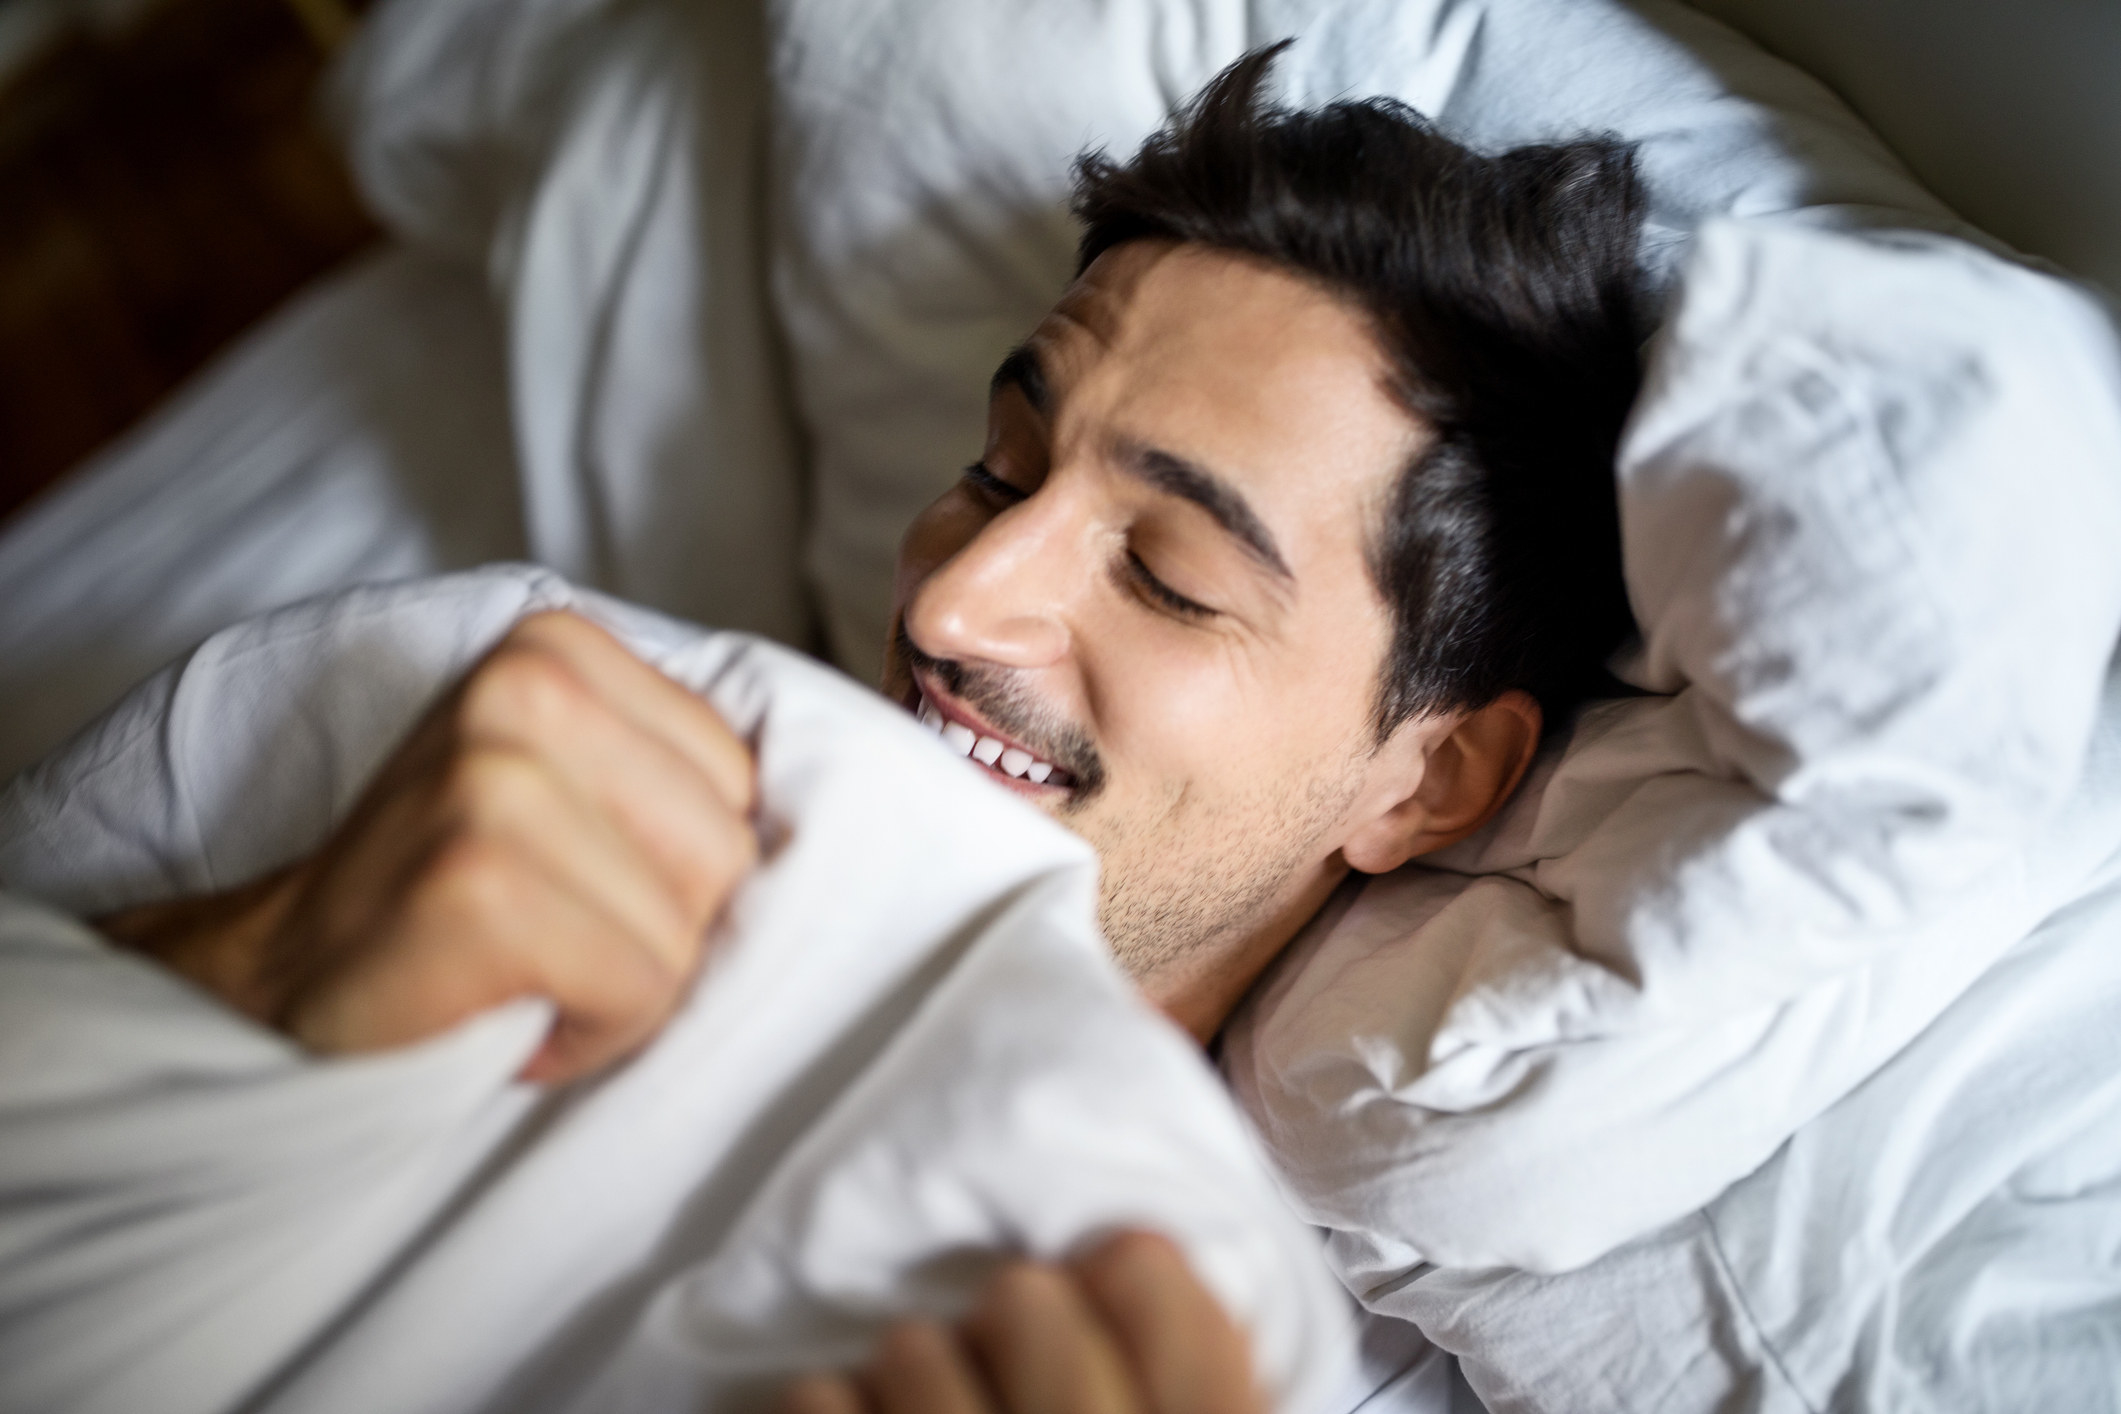 Smiling young man sleeping comfortably in bed at home